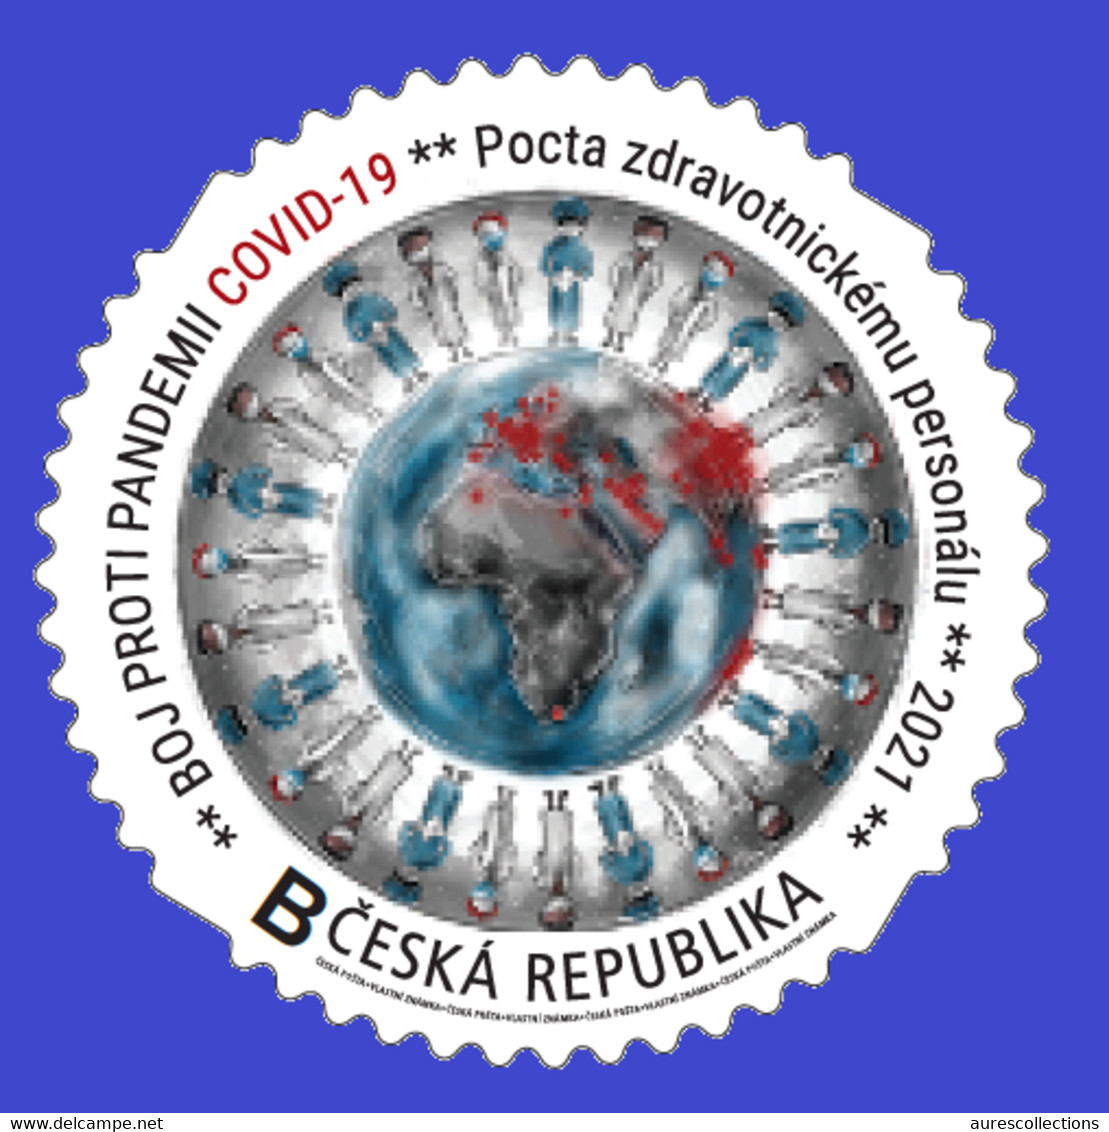 CZECH REPUBLIC TCHEQUE 2021 - STRIP 5v - OWN STAMPS - JOINT ISSUE - COVID-19 PANDEMIC PANDEMIE CORONA CORONAVIRUS - MNH - Emisiones Comunes